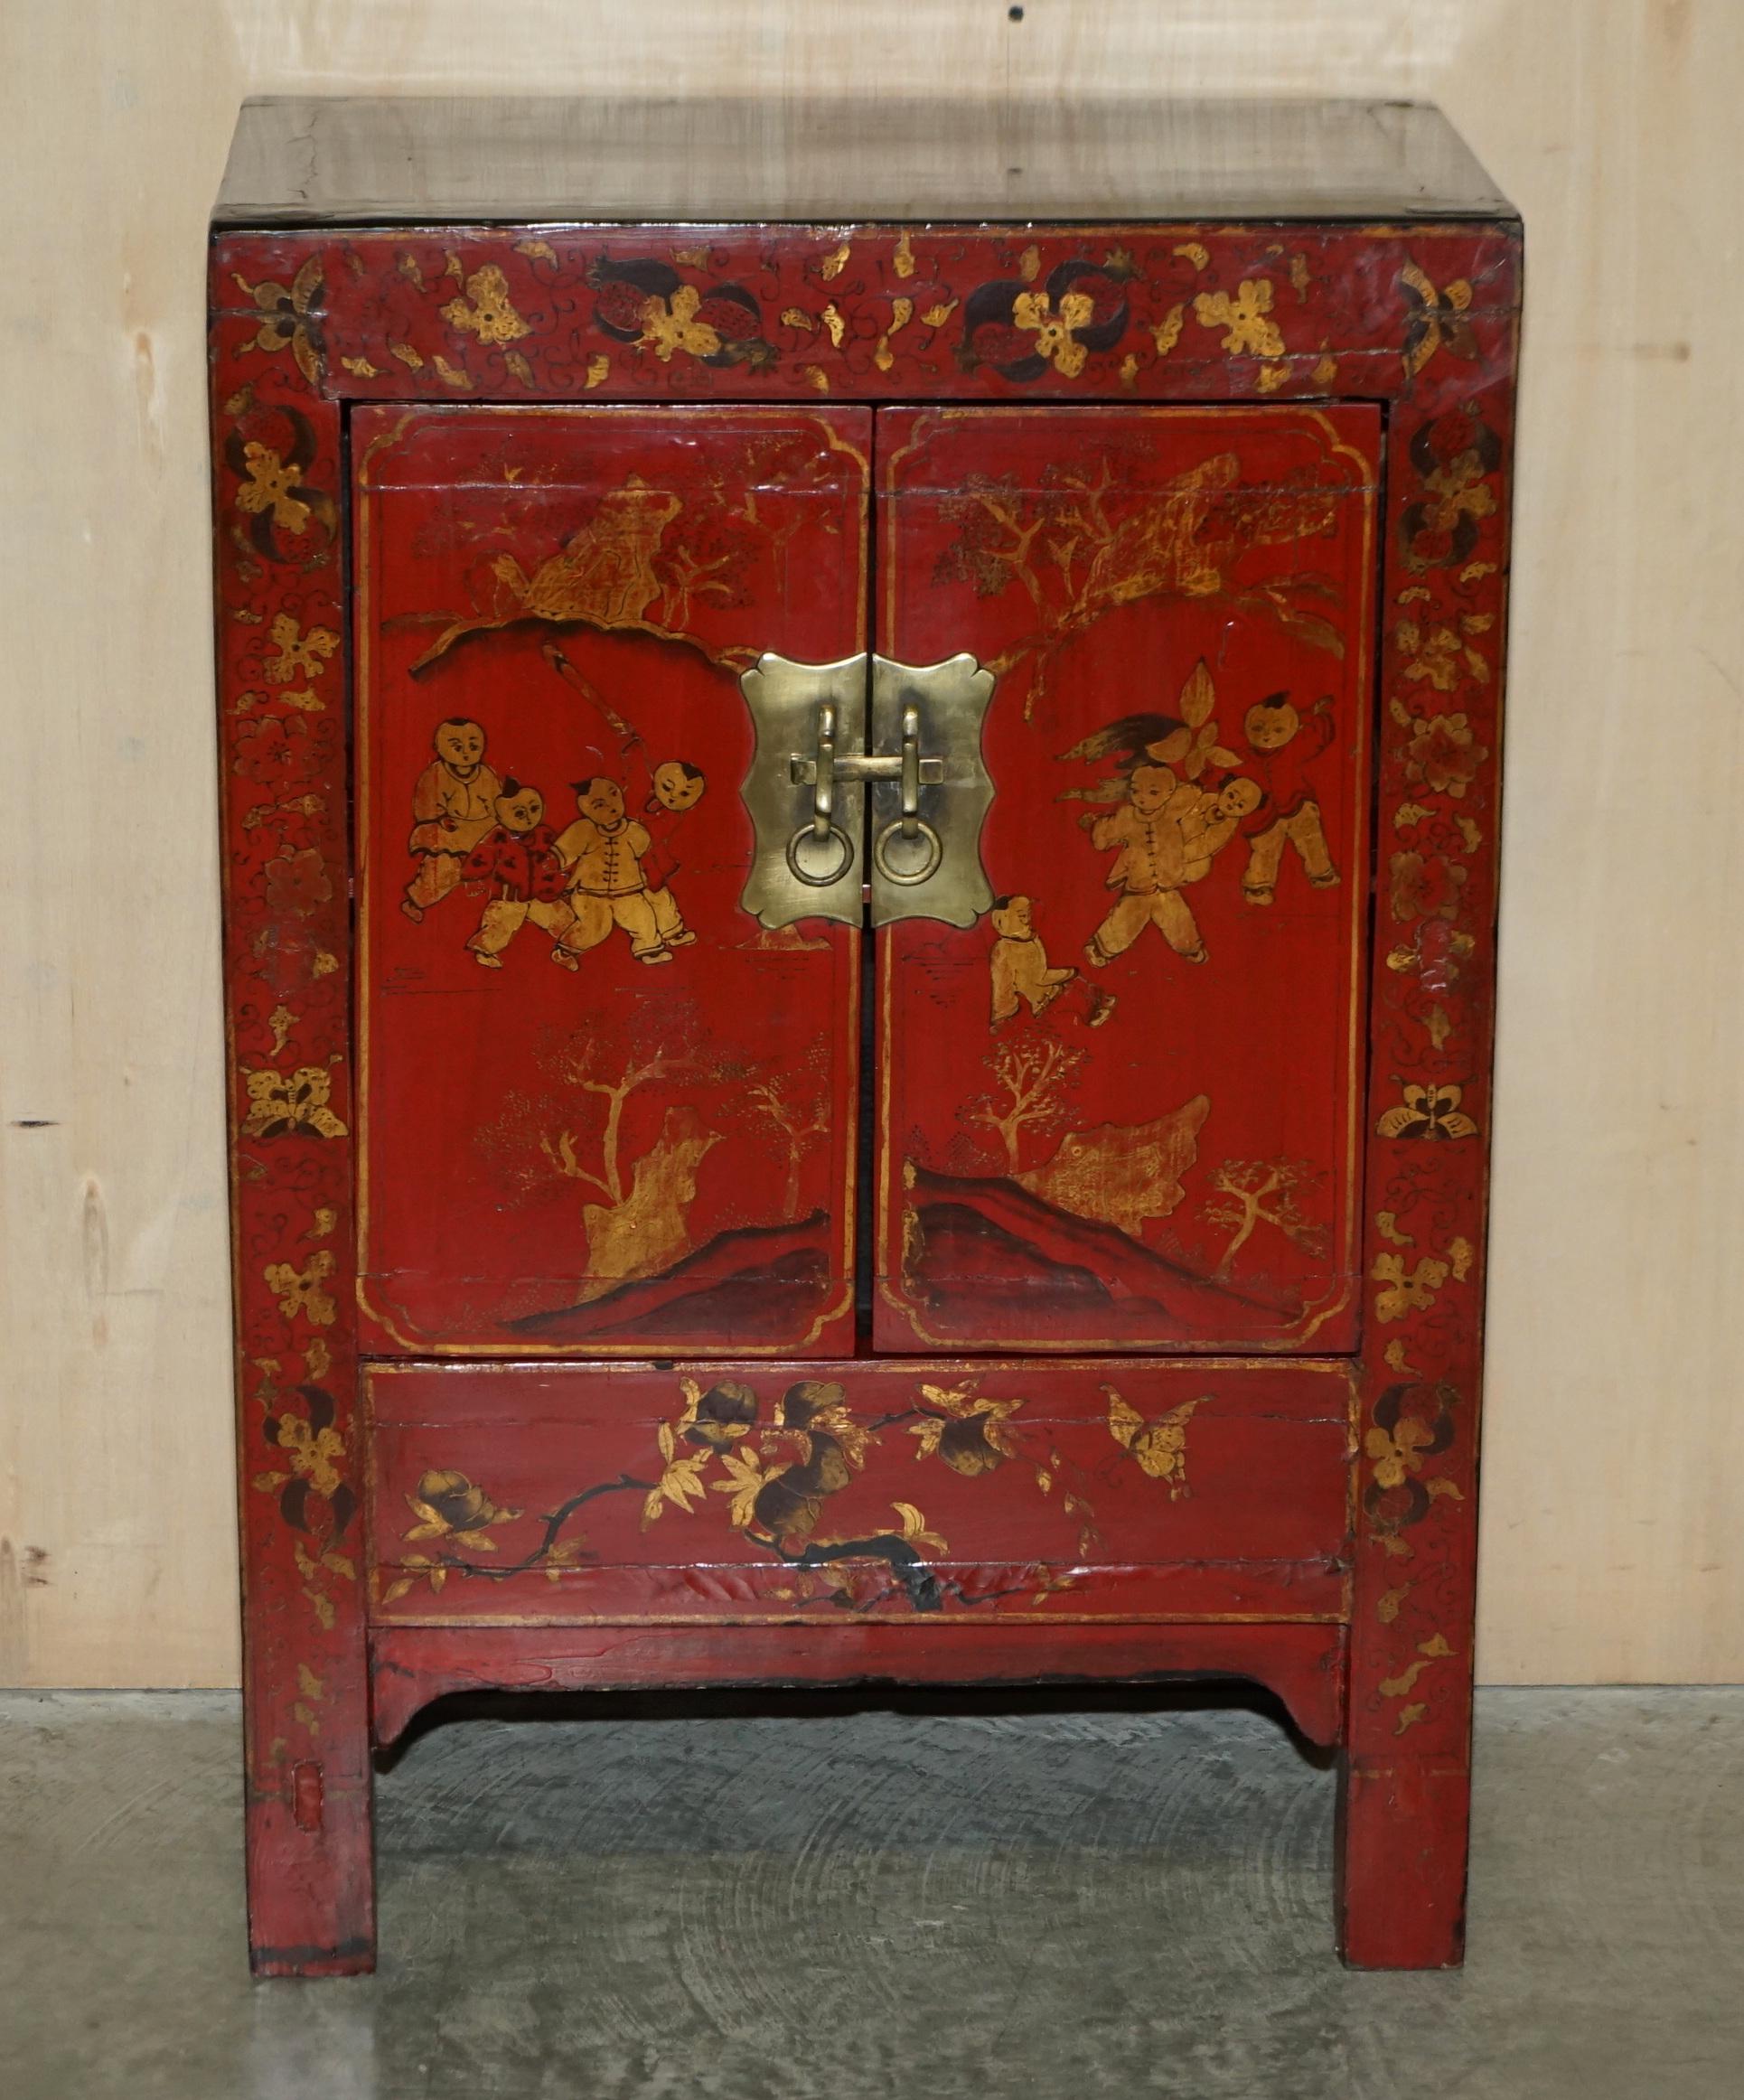 Royal House Antiques

Royal House Antiques is delighted to offer for sale this lovely vintage circa 1920's hand painted and lacquered Chinese Wedding cupboard for folded linens etc

Please note the delivery fee listed is just a guide, it covers